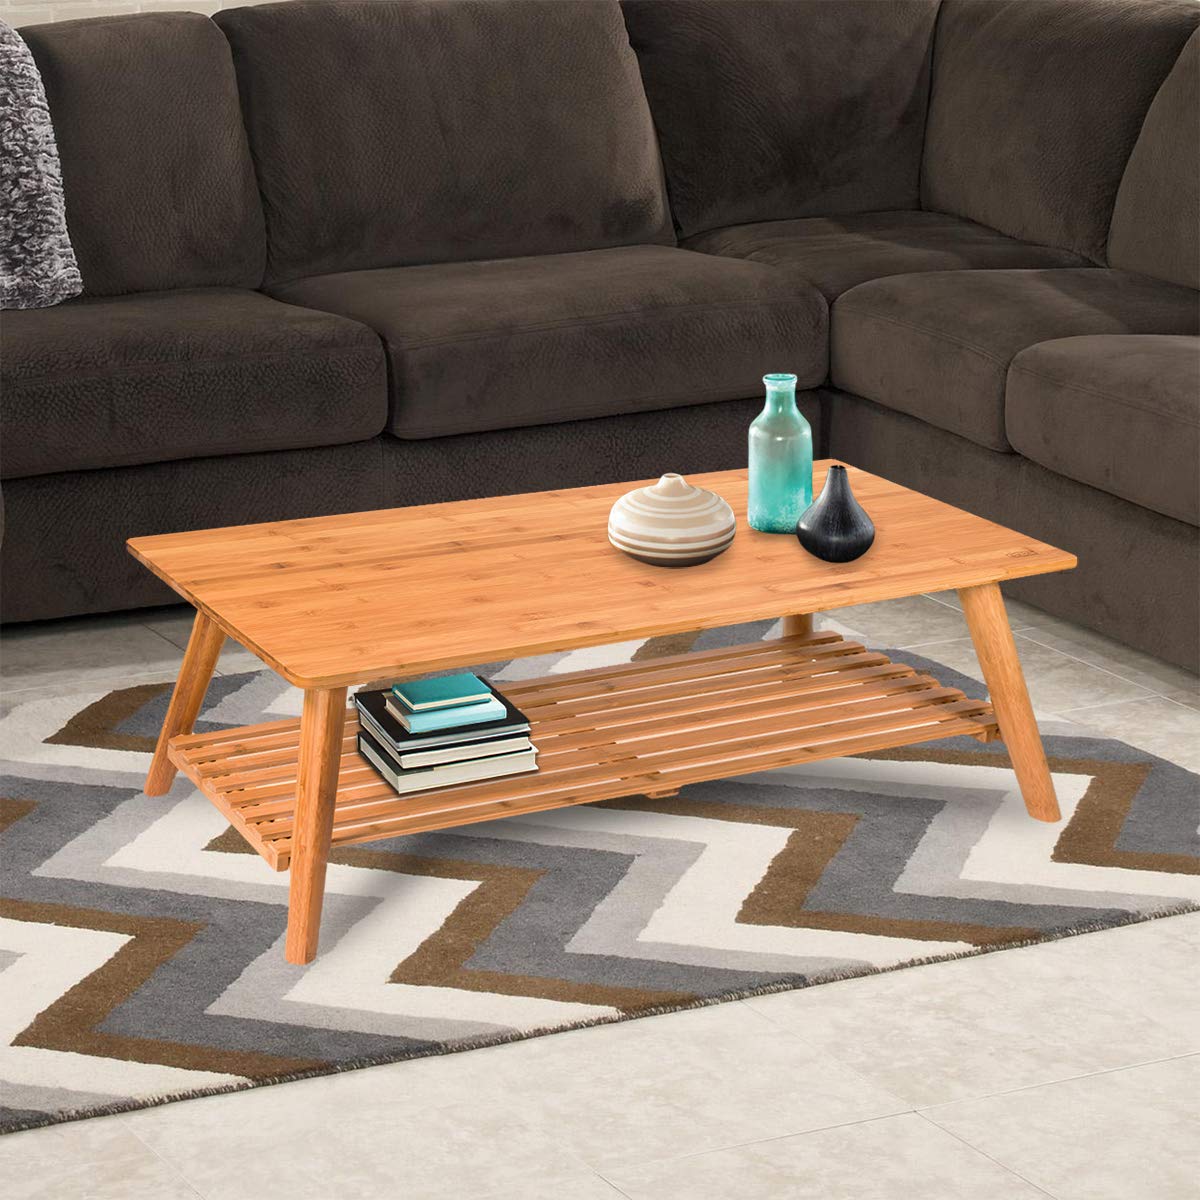 Bamboo coffee table in living room